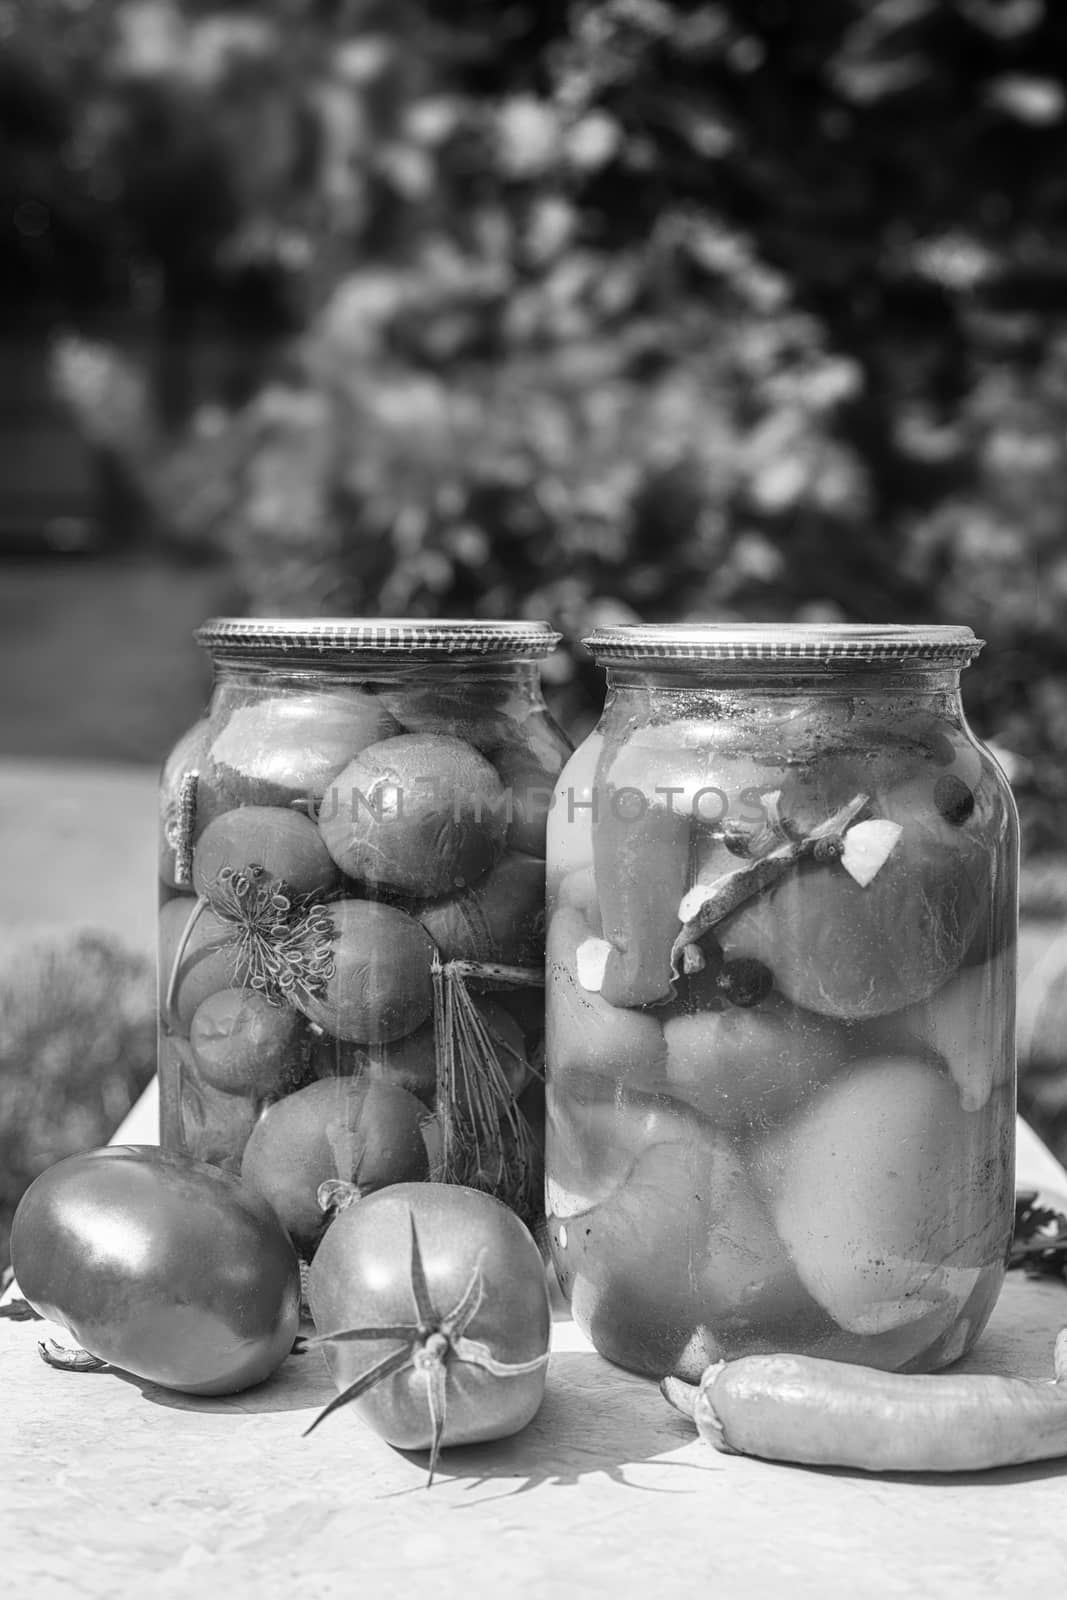 Home preservation: two large glass jars with red ripe pickled tomatoes and peppers, closed with a metal lid, on a table in the garden. Front view, copy space.Black and white image